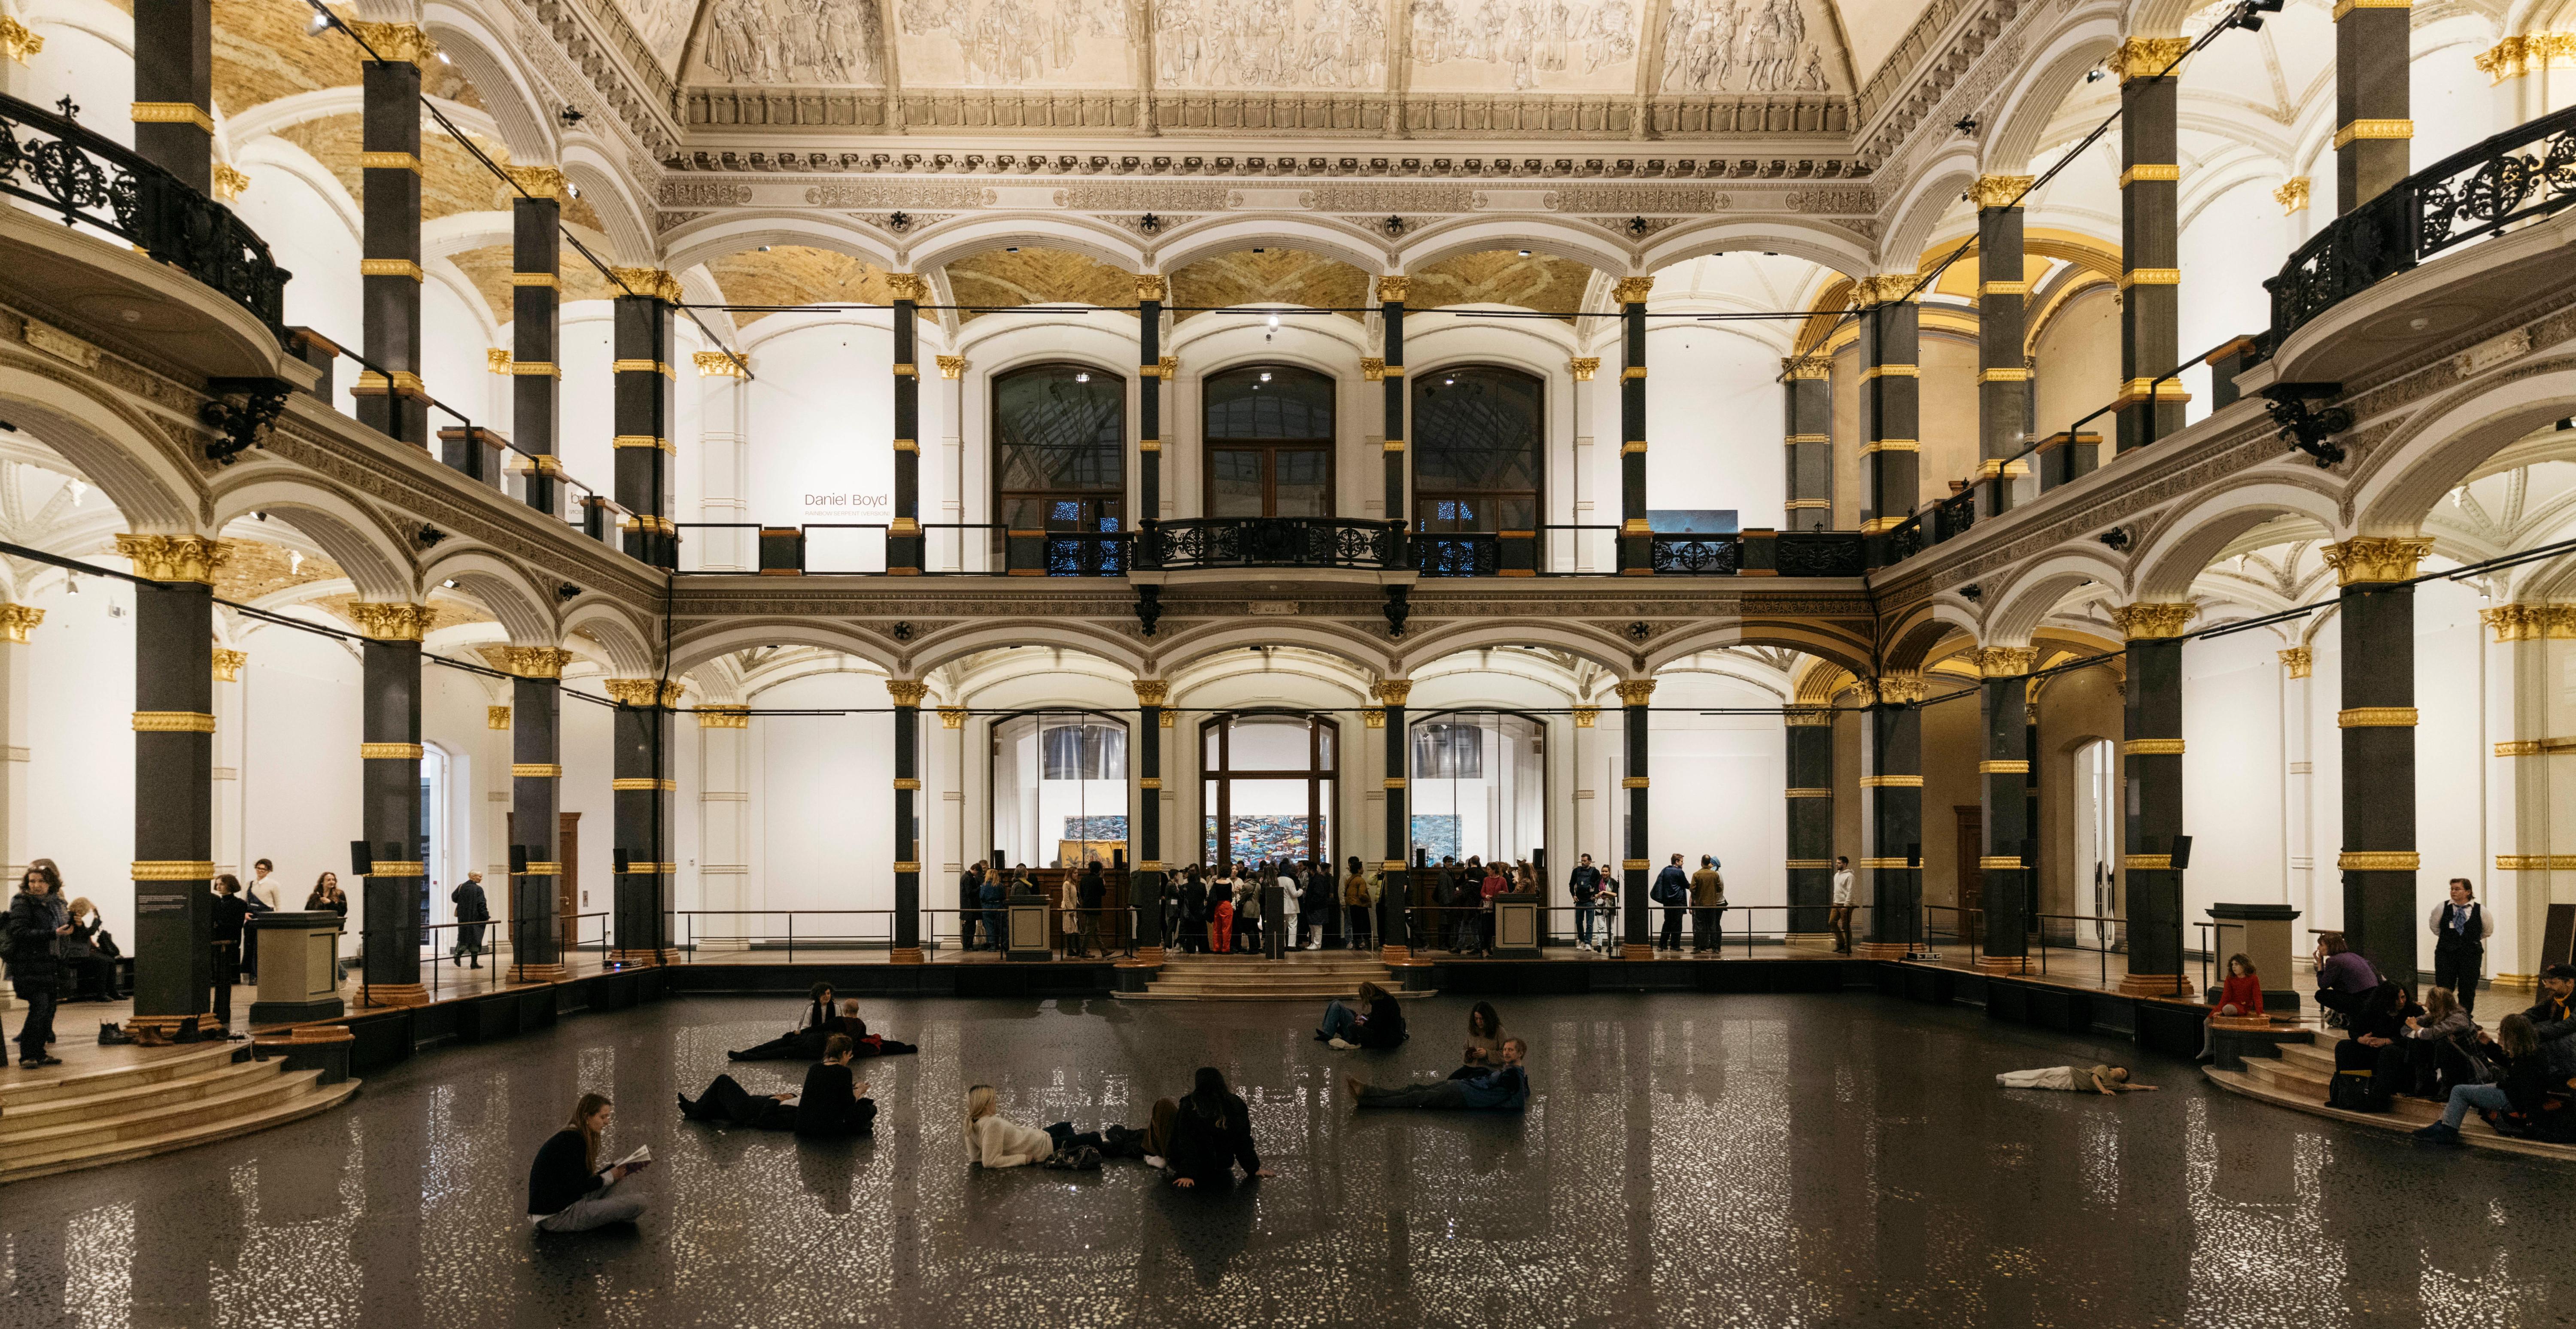 The atrium of the Gropius Bau. The floor is covered with a reflective foil as part of the Daniel Boyd's exhibition "RAINBOW SERPENT (VERSION)".